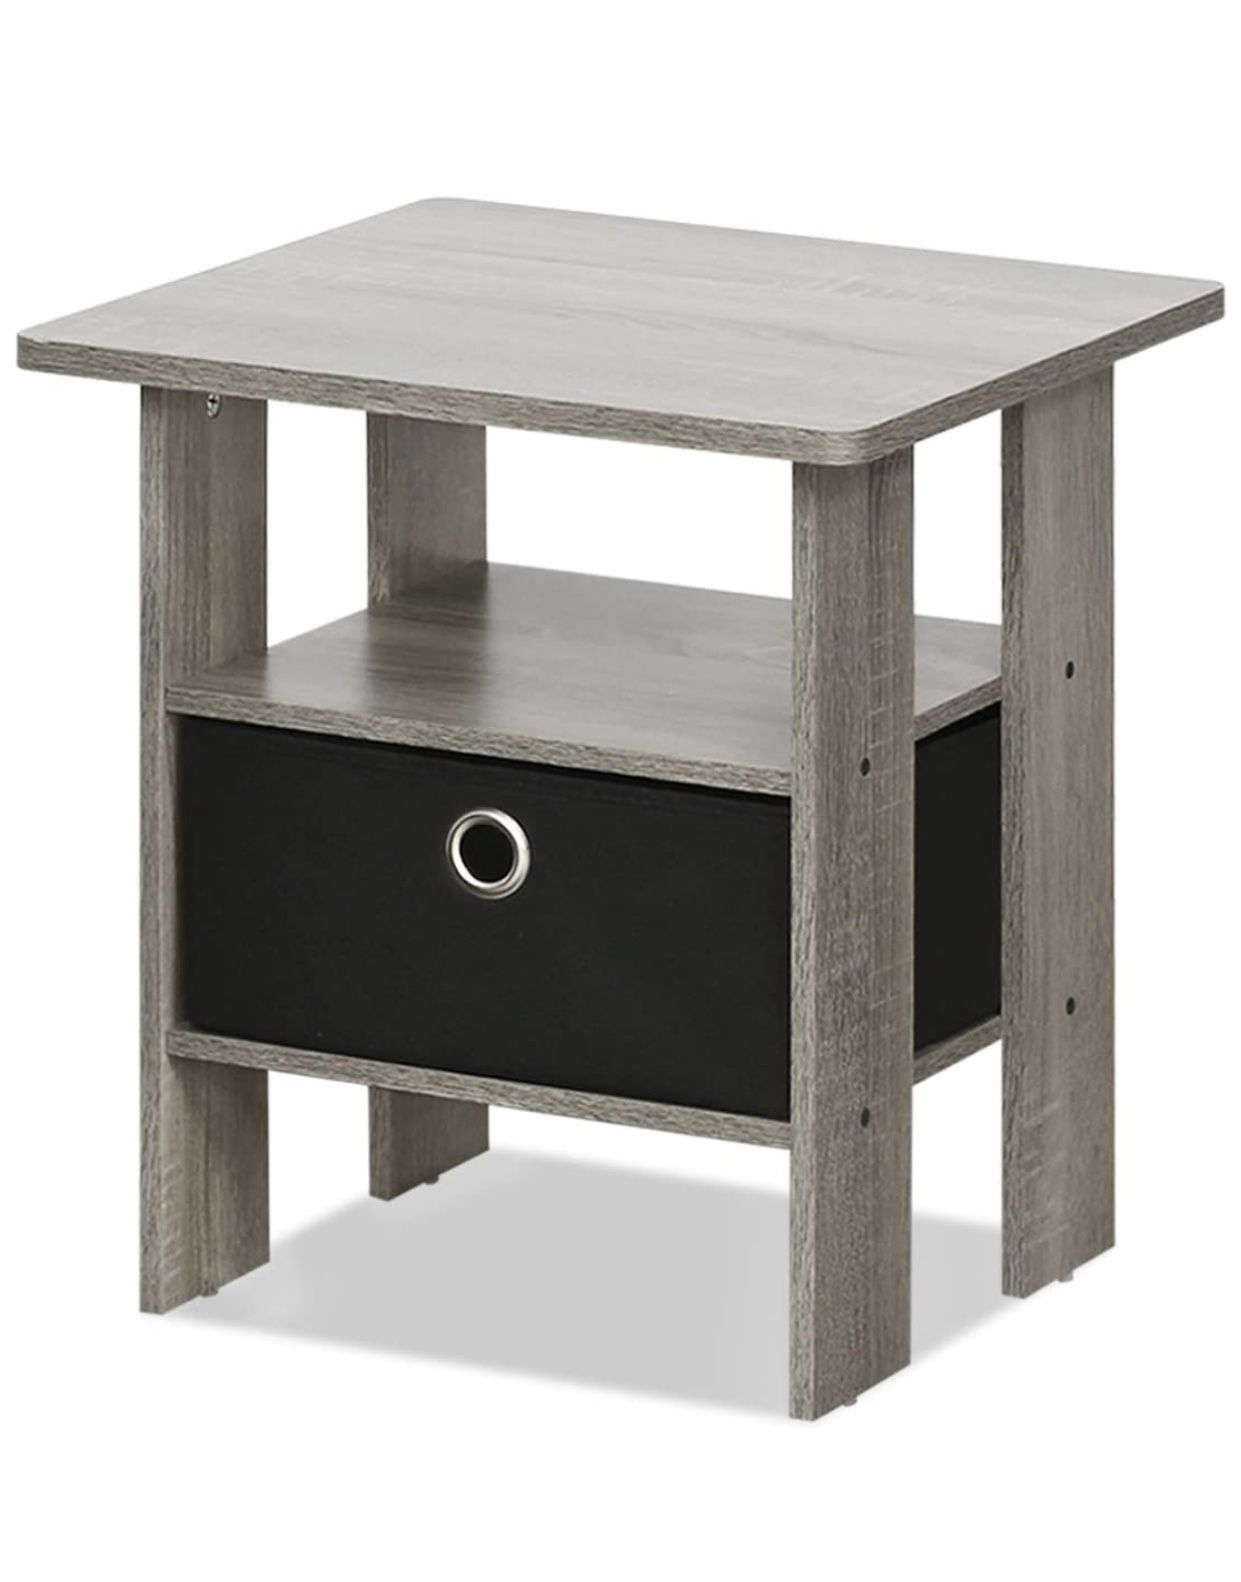 Small Nightstand/ End Table- See Measurements